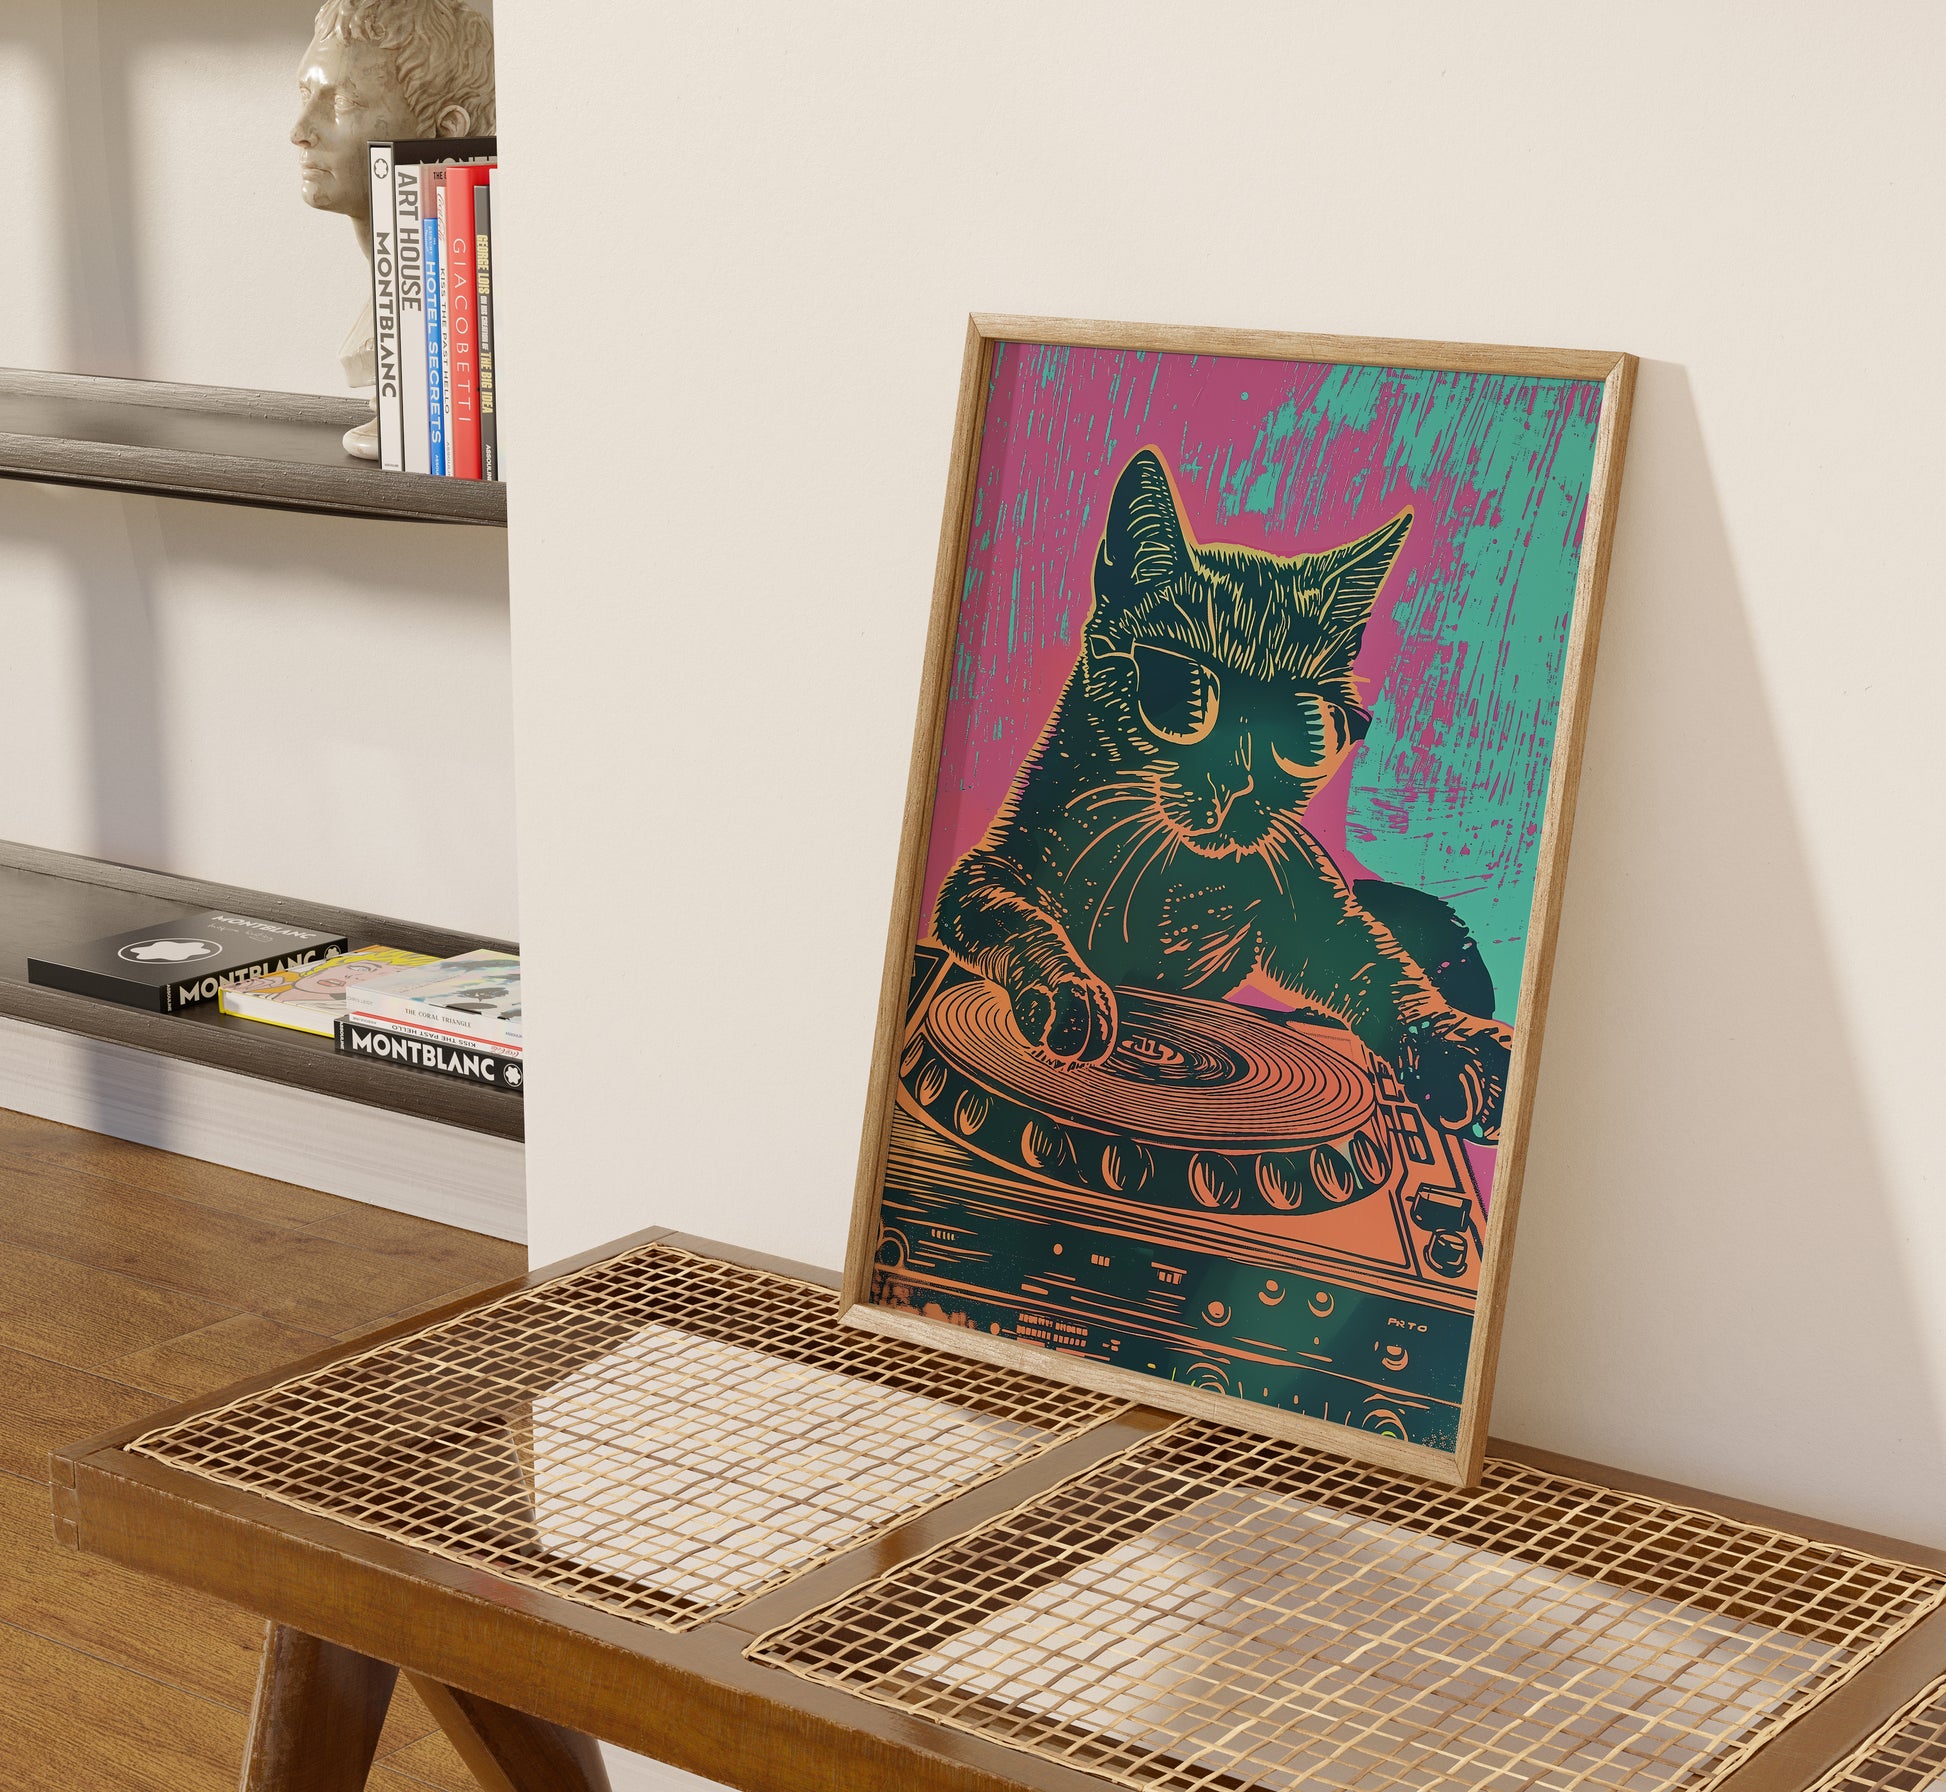 A colorful artwork of a cat with a turntable on a side table against a wall.